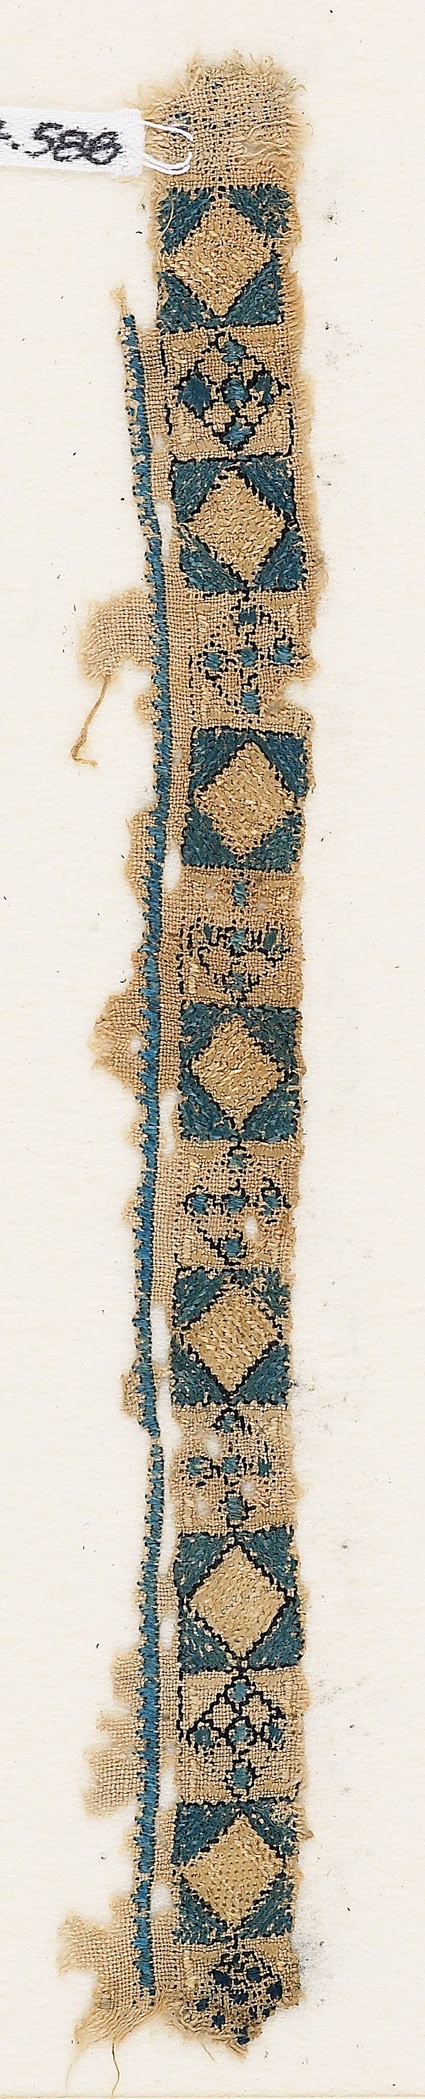 Textile fragment with band of diamond-shapes and crossesfront